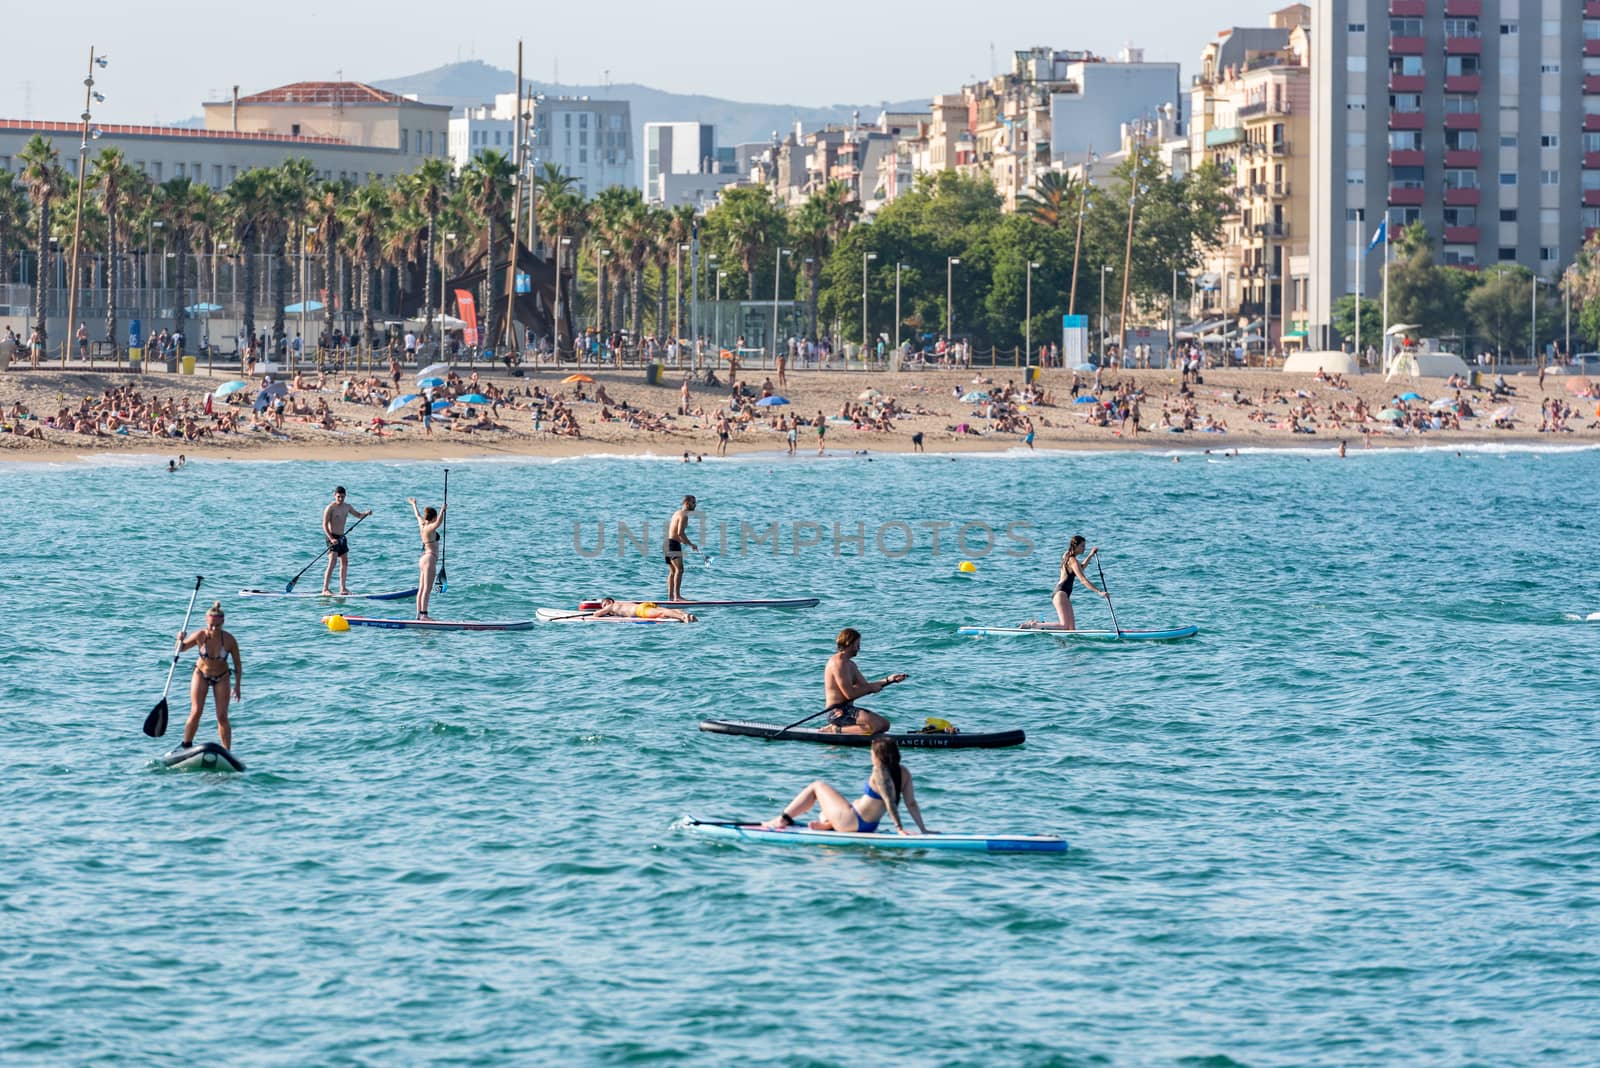 Barcelona, Spain - July 28 2020:  People riding Paddle Surf after COVID 19 La Barceloneta in Barcelona, Spain.